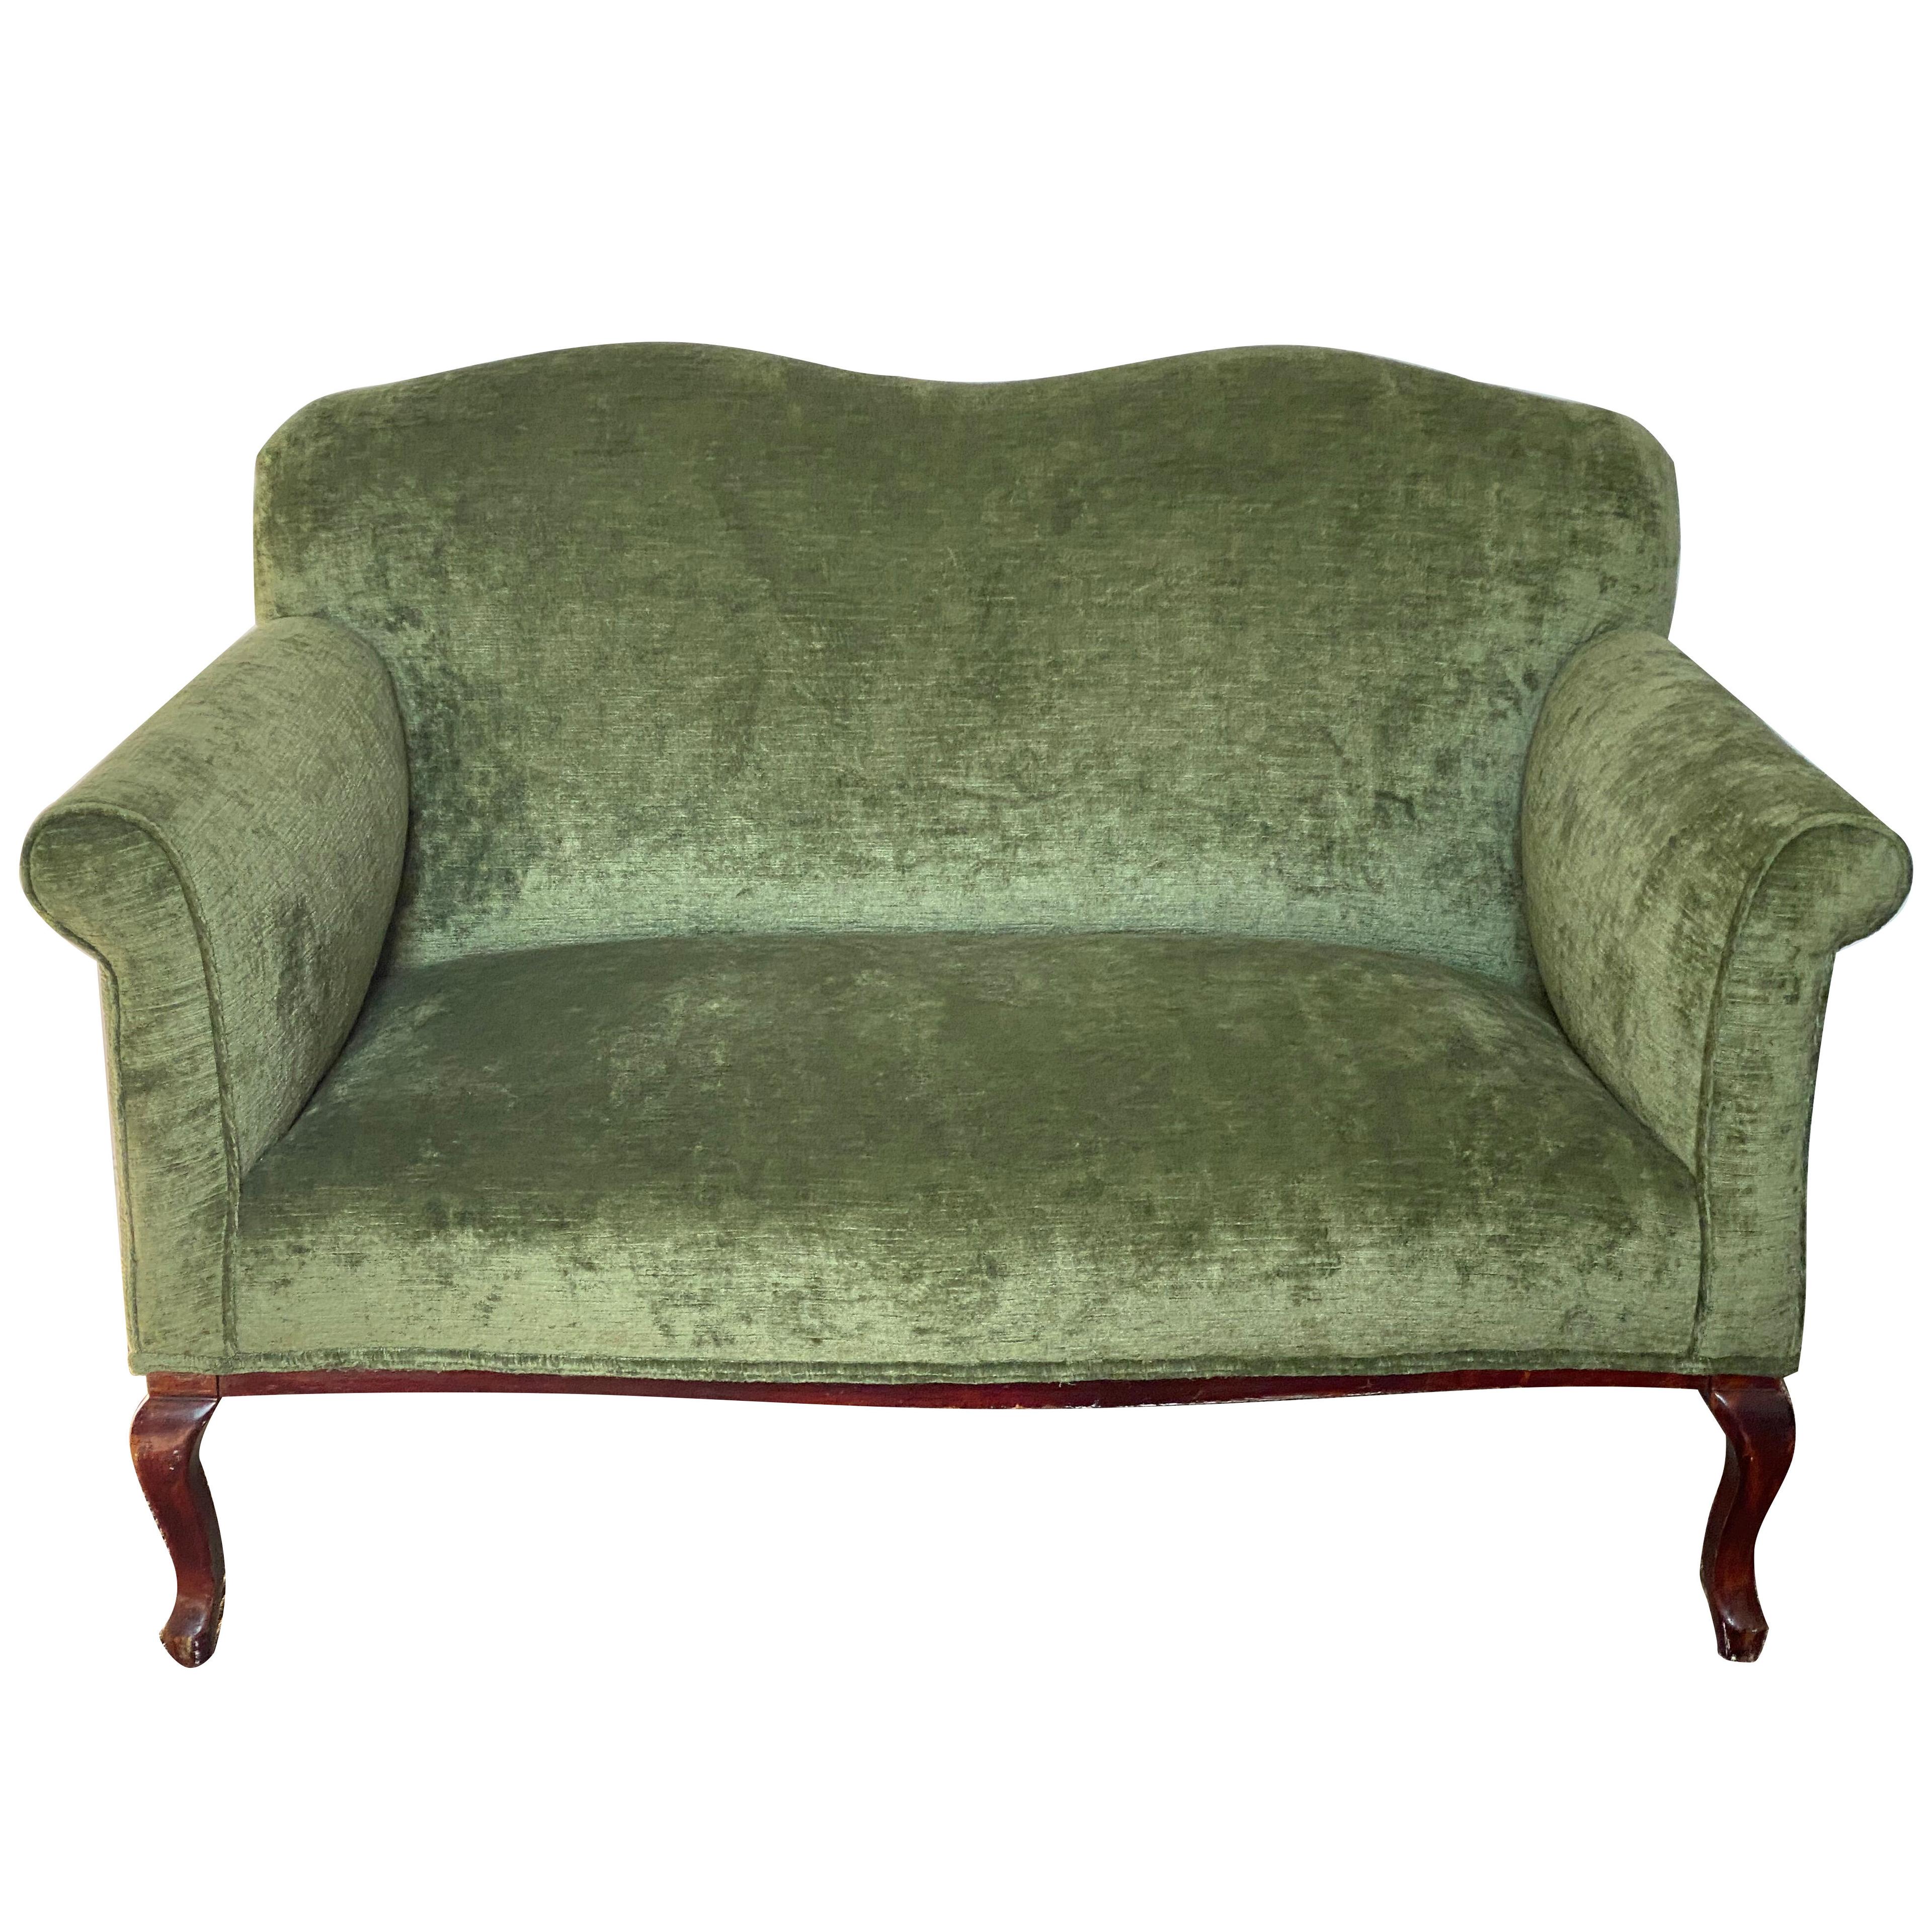 Antique small Sofa,Twoseater ,England